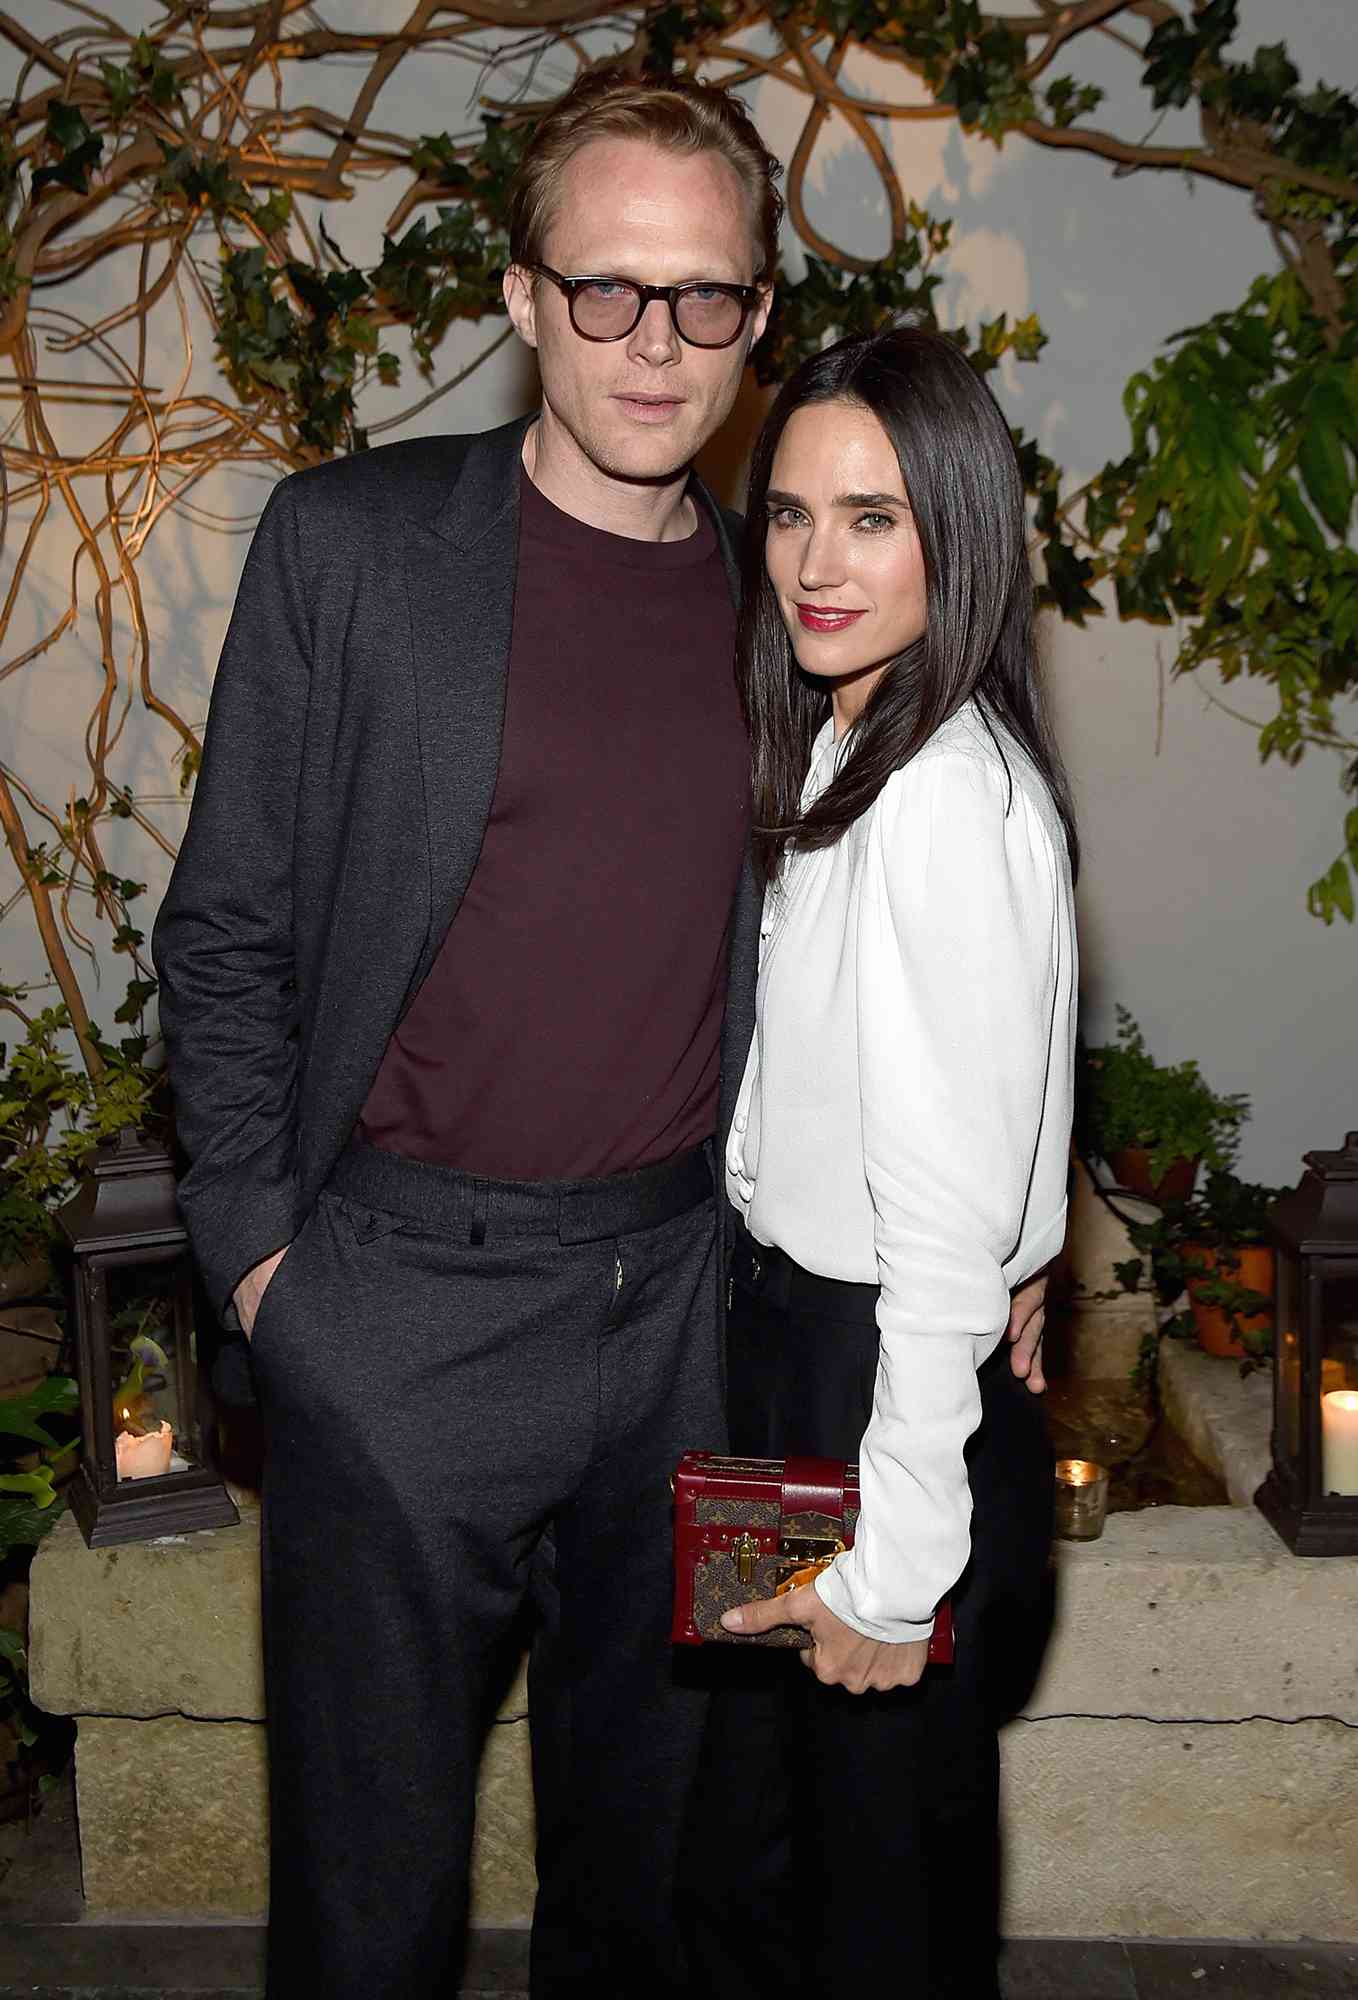 Paul Bettany and Jennifer Connelly attend The Cinema Society with Town & Country host a special screening ff Sony Pictures Classics' "Aloft" after party at Laduree Soho on May 18, 2015 in New York City